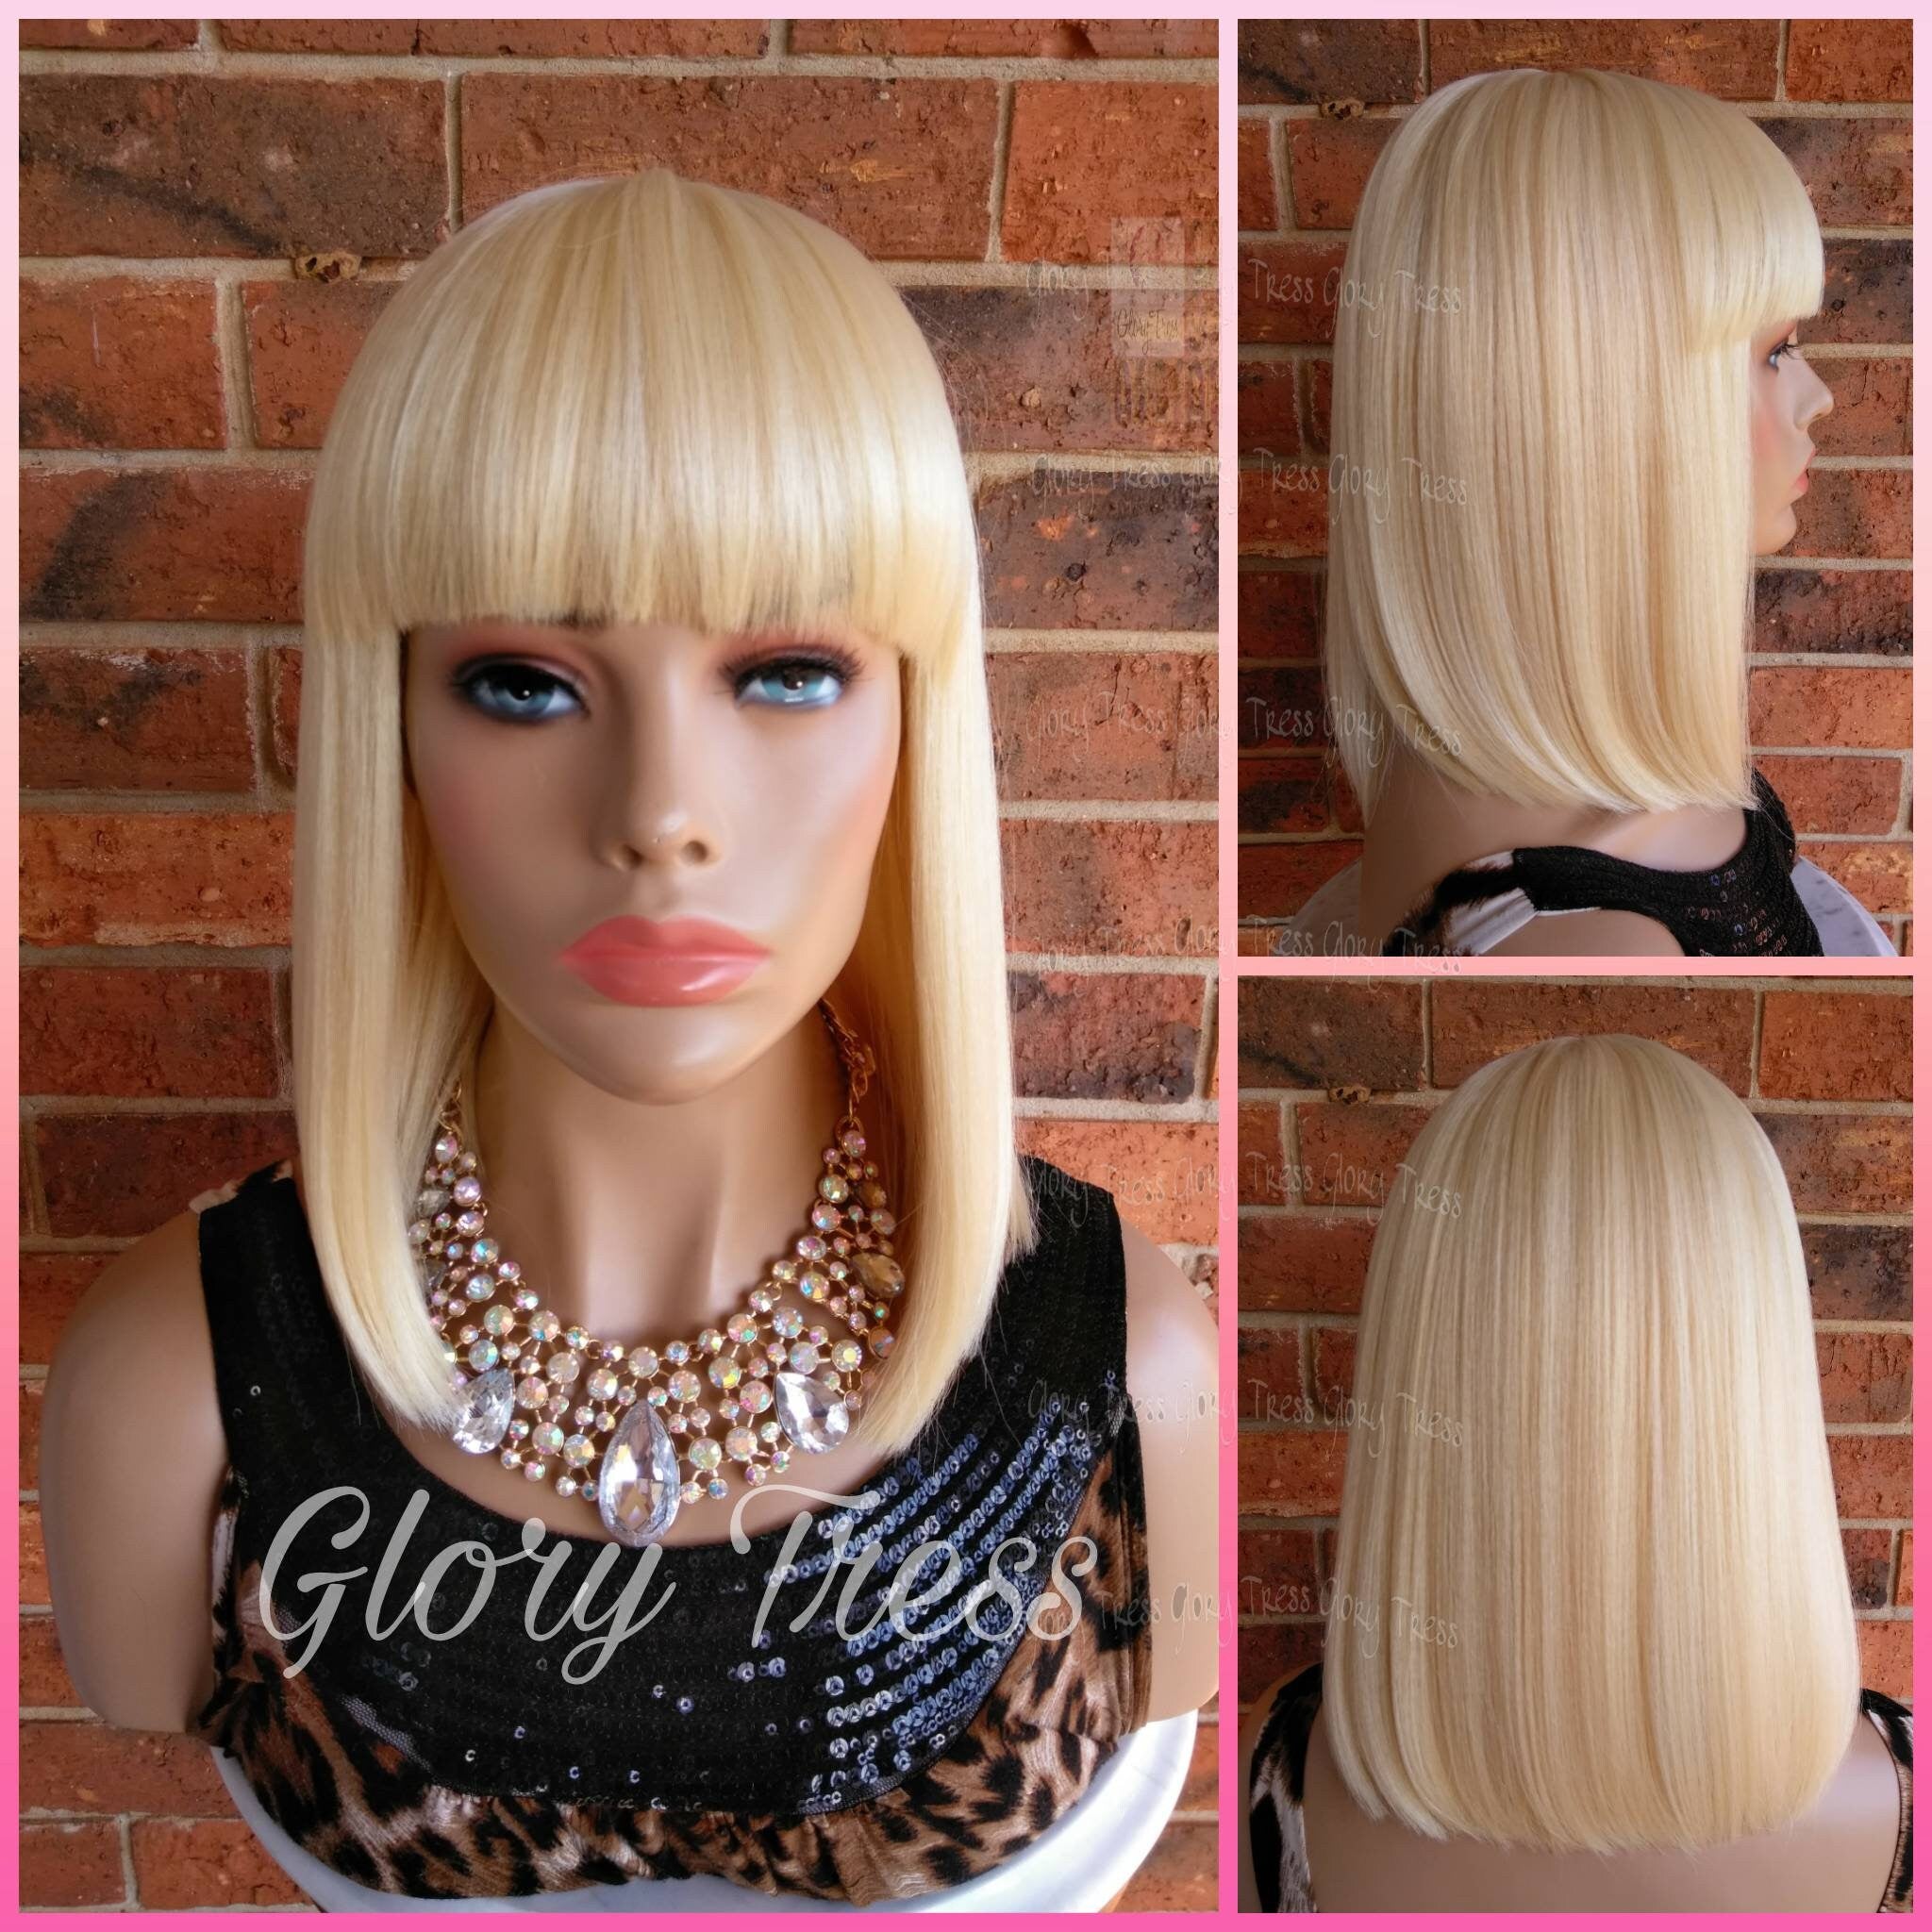 Wigs - Blonde Wig - Glory Tress - Full Cap Wig - China Bang wig - Human Hair Blend Wig - Straight Wig - ON SALE // CHARITY